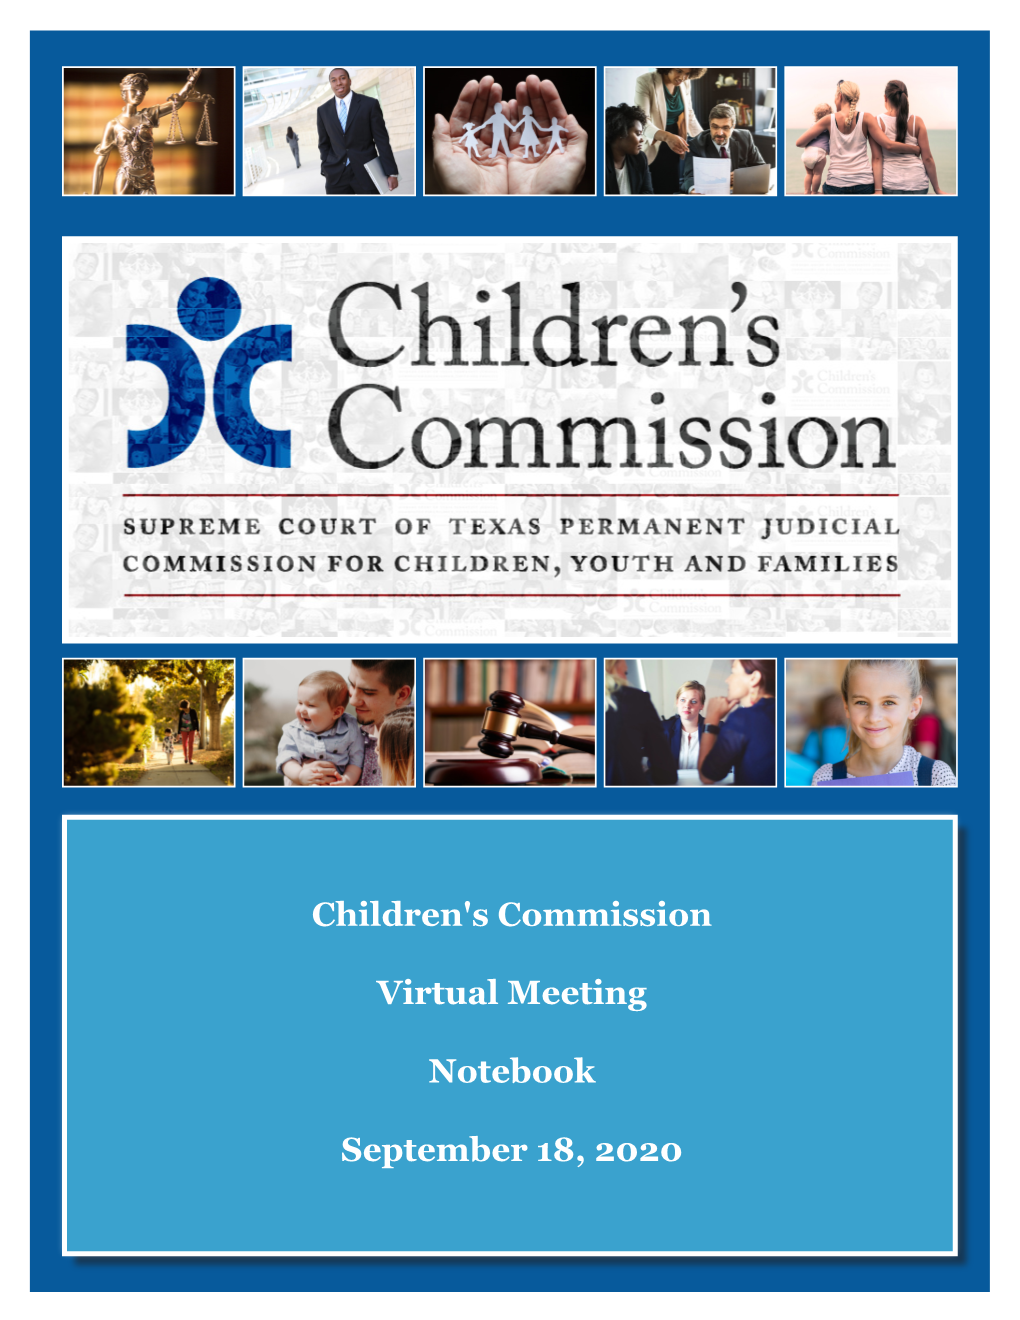 Children's Commission Virtual Meeting Notebook September 18